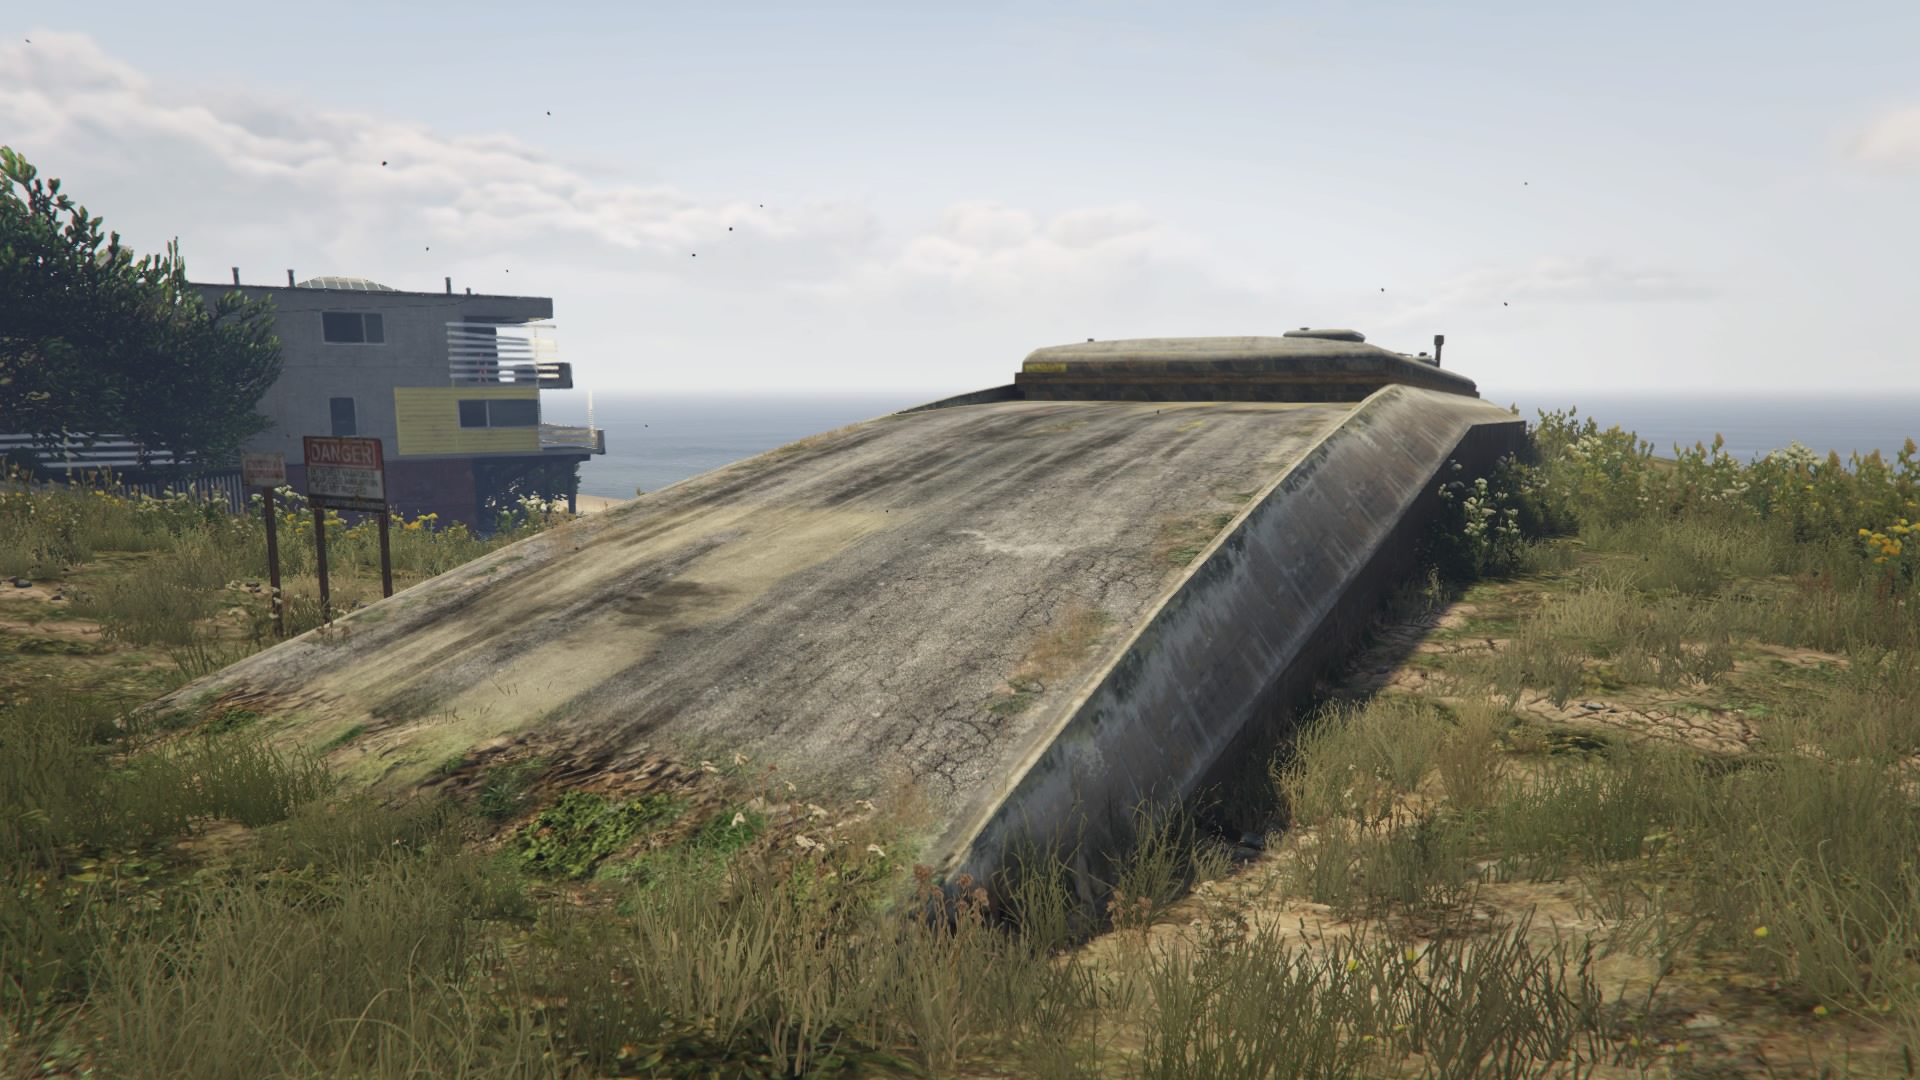 The elegant Chumash Bunker with ocean front access.